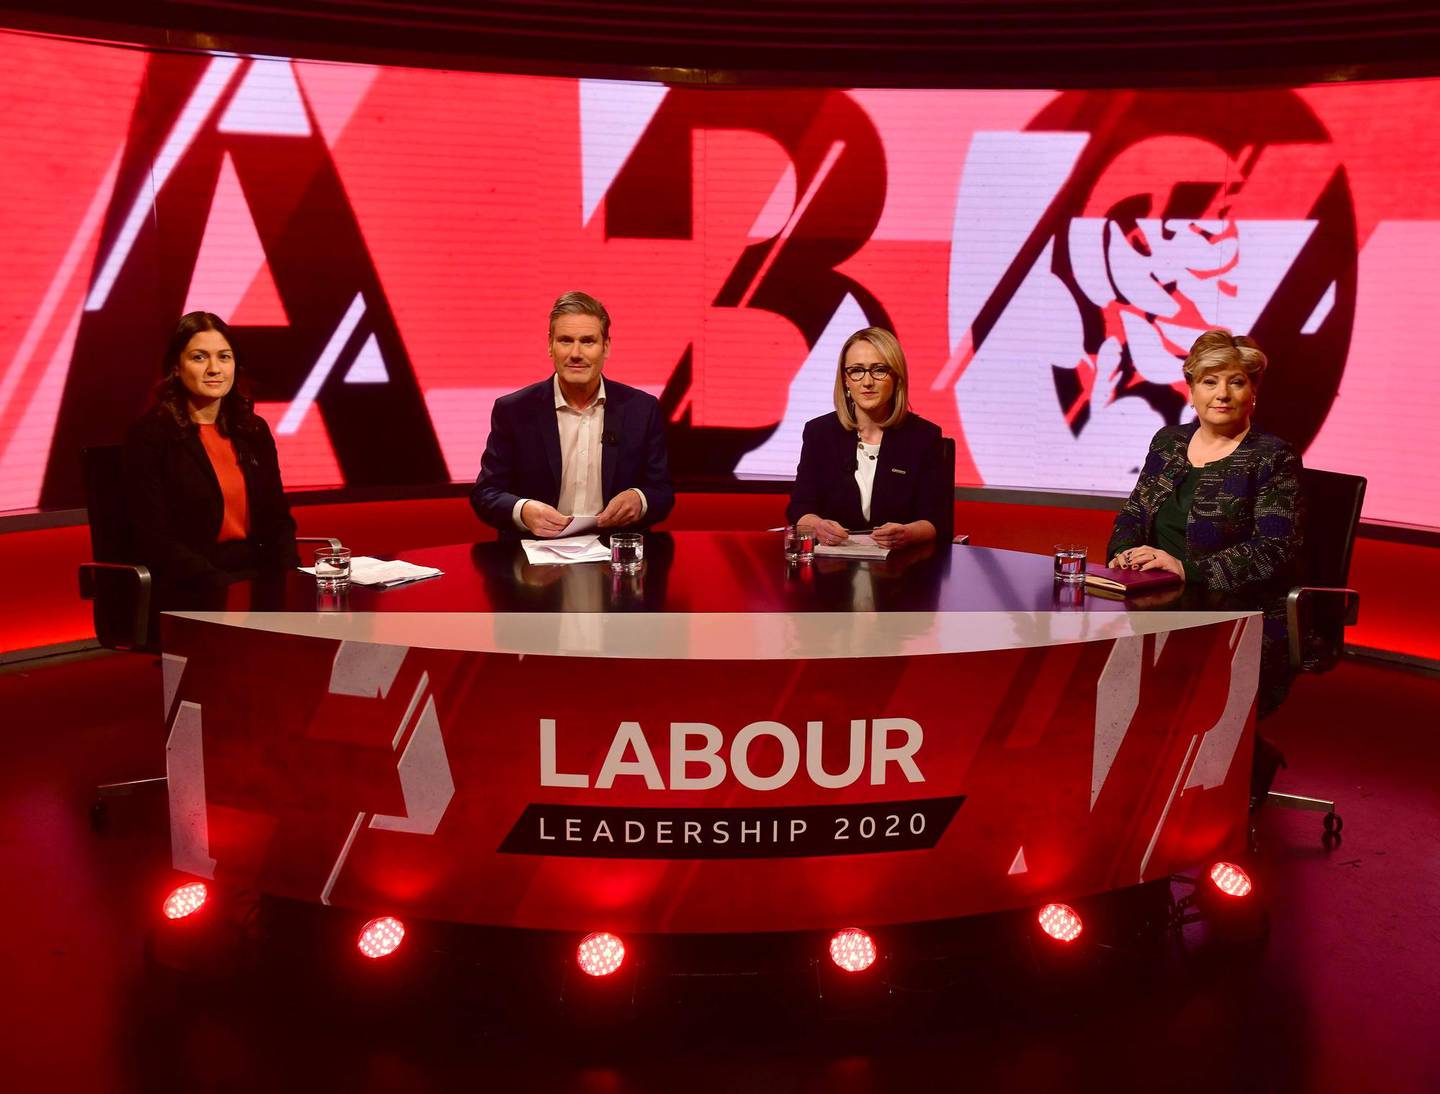 Britain's opposition Labour Party leadership contenders,Emily Thornberry, Keir Starmer, Lisa Nandy and Rebecca Long-Bailey, are seen before the televised Labour leadership debate on BBC Newsnight in London, Britain February 12, 2020. Jeff Overs/BBC/Handout via REUTERS ATTENTION EDITORS - THIS IMAGE HAS BEEN SUPPLIED BY A THIRD PARTY. NO RESALES. NO ARCHIVES. NOT FOR USE MORE THAN 21 DAYS AFTER ISSUE.